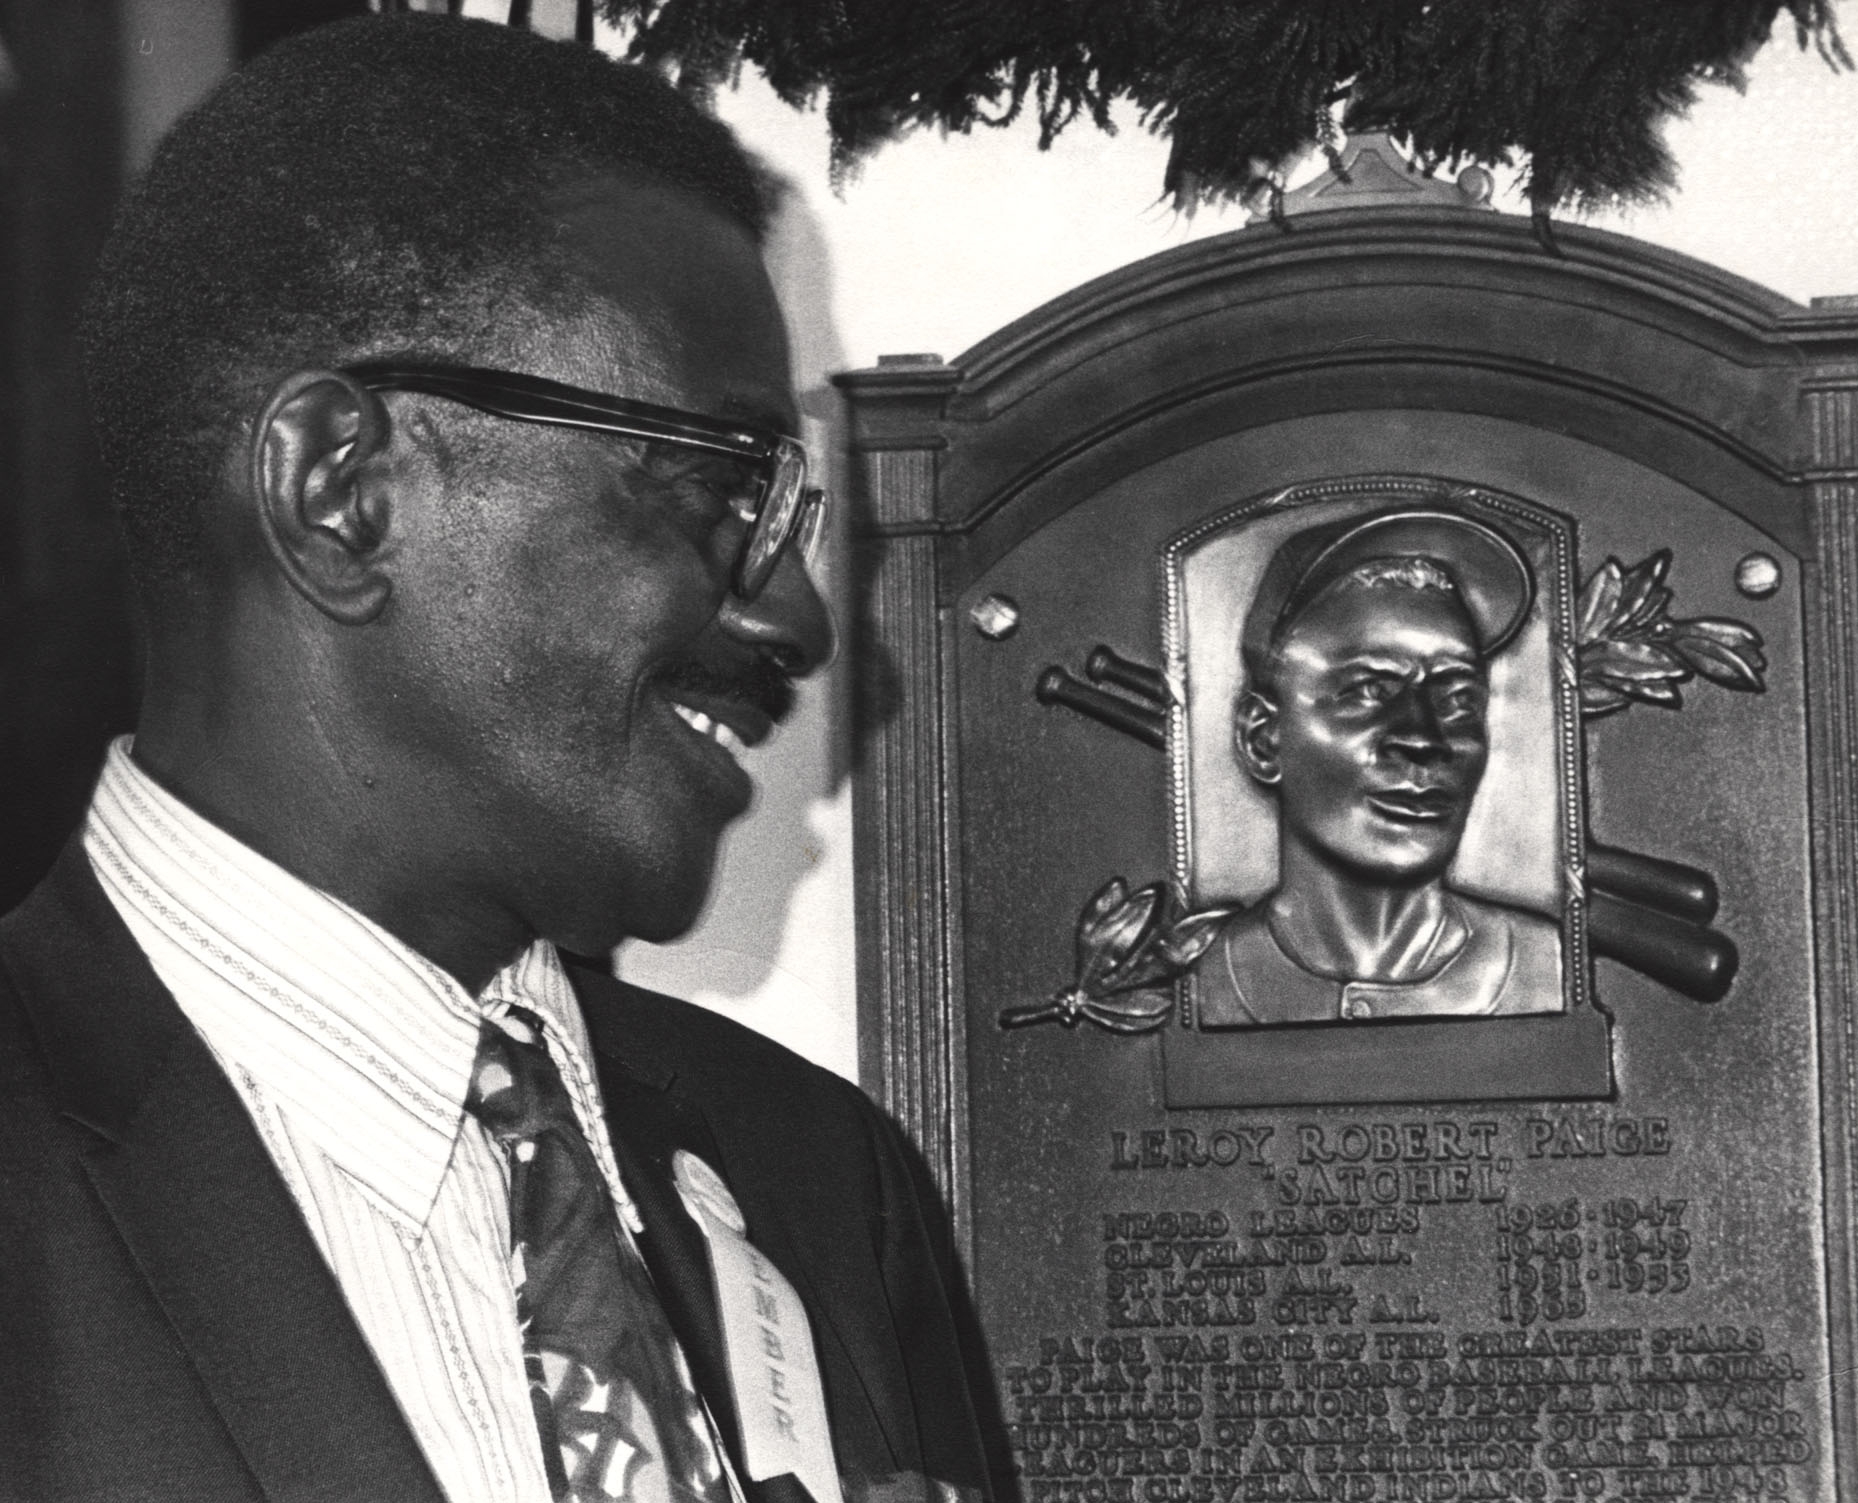 Satchel Paige at Hall of Fame induction